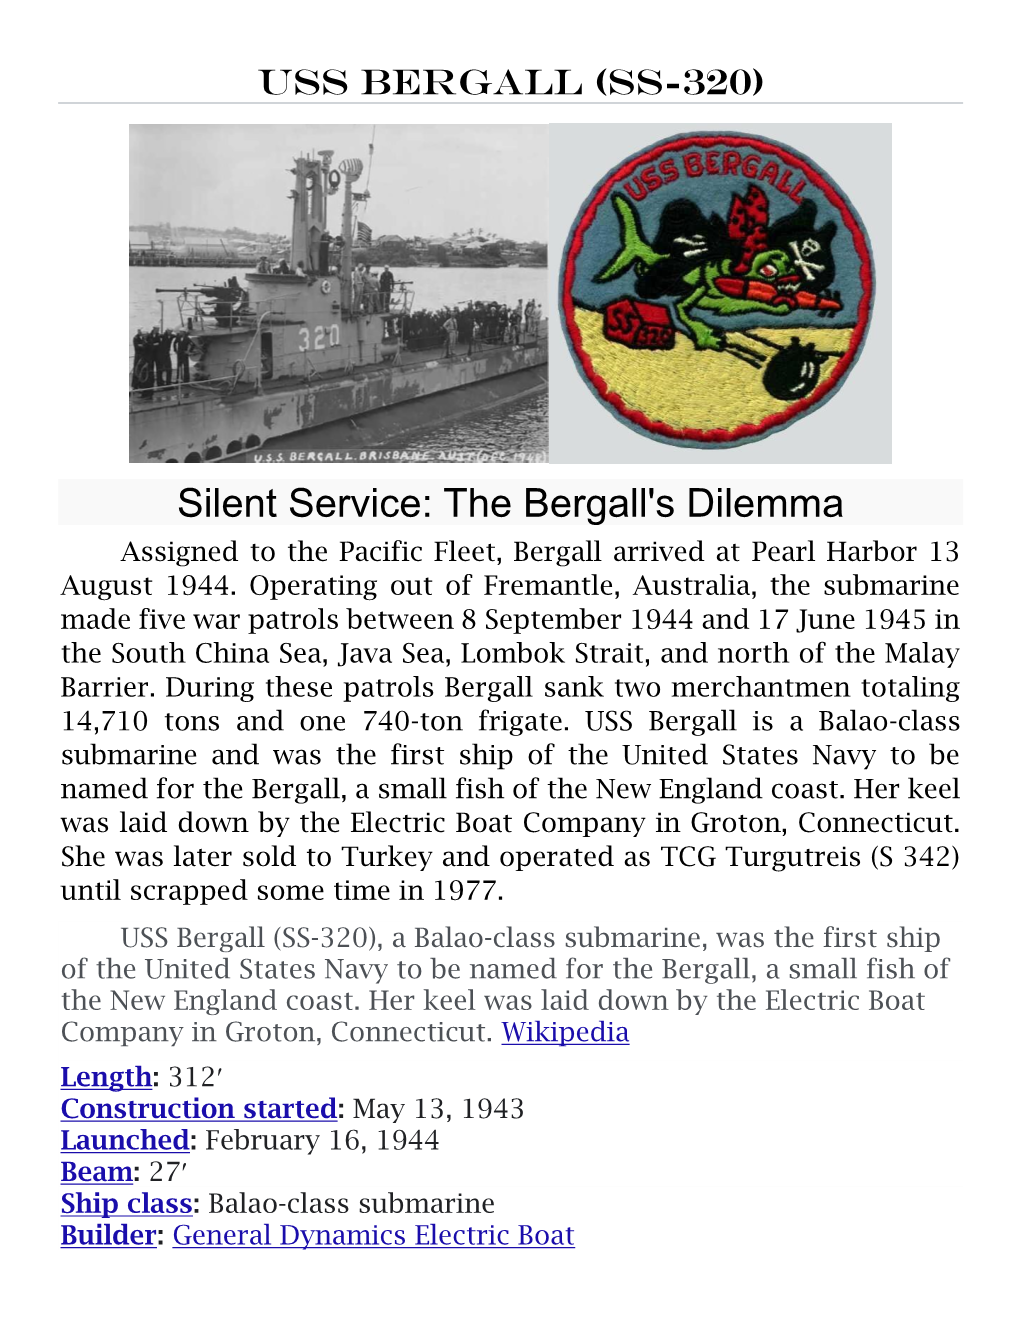 Silent Service: the Bergall's Dilemma Assigned to the Pacific Fleet, Bergall Arrived at Pearl Harbor 13 August 1944